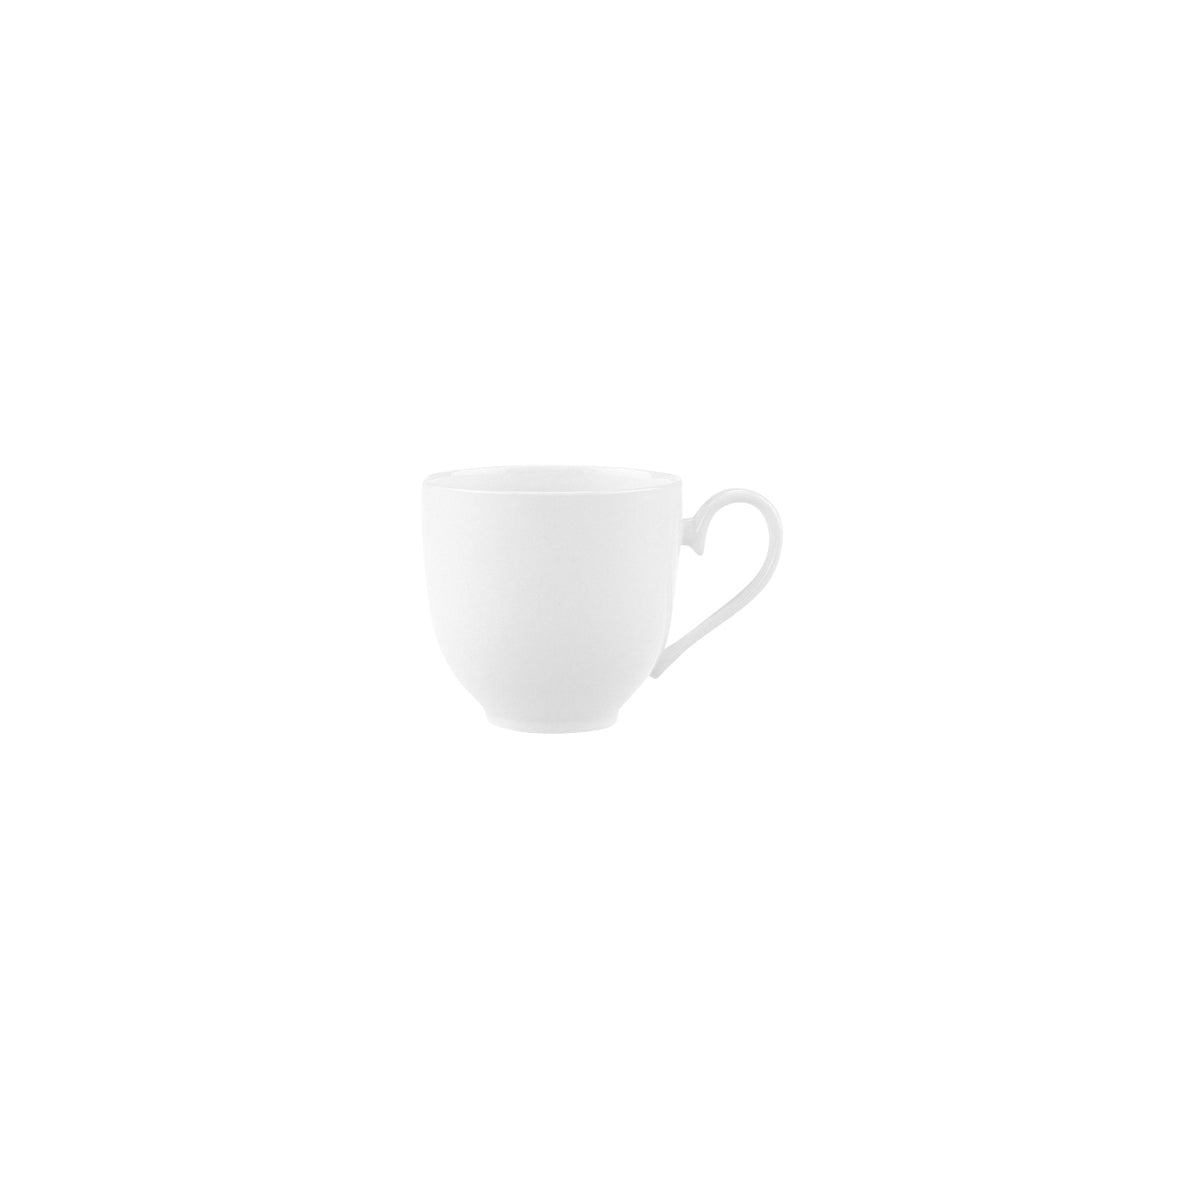 VB16-3272-1420 Villeroy And Boch Villeroy And Boch Stella Hotel White Cup No. 5 100ml Tomkin Australia Hospitality Supplies